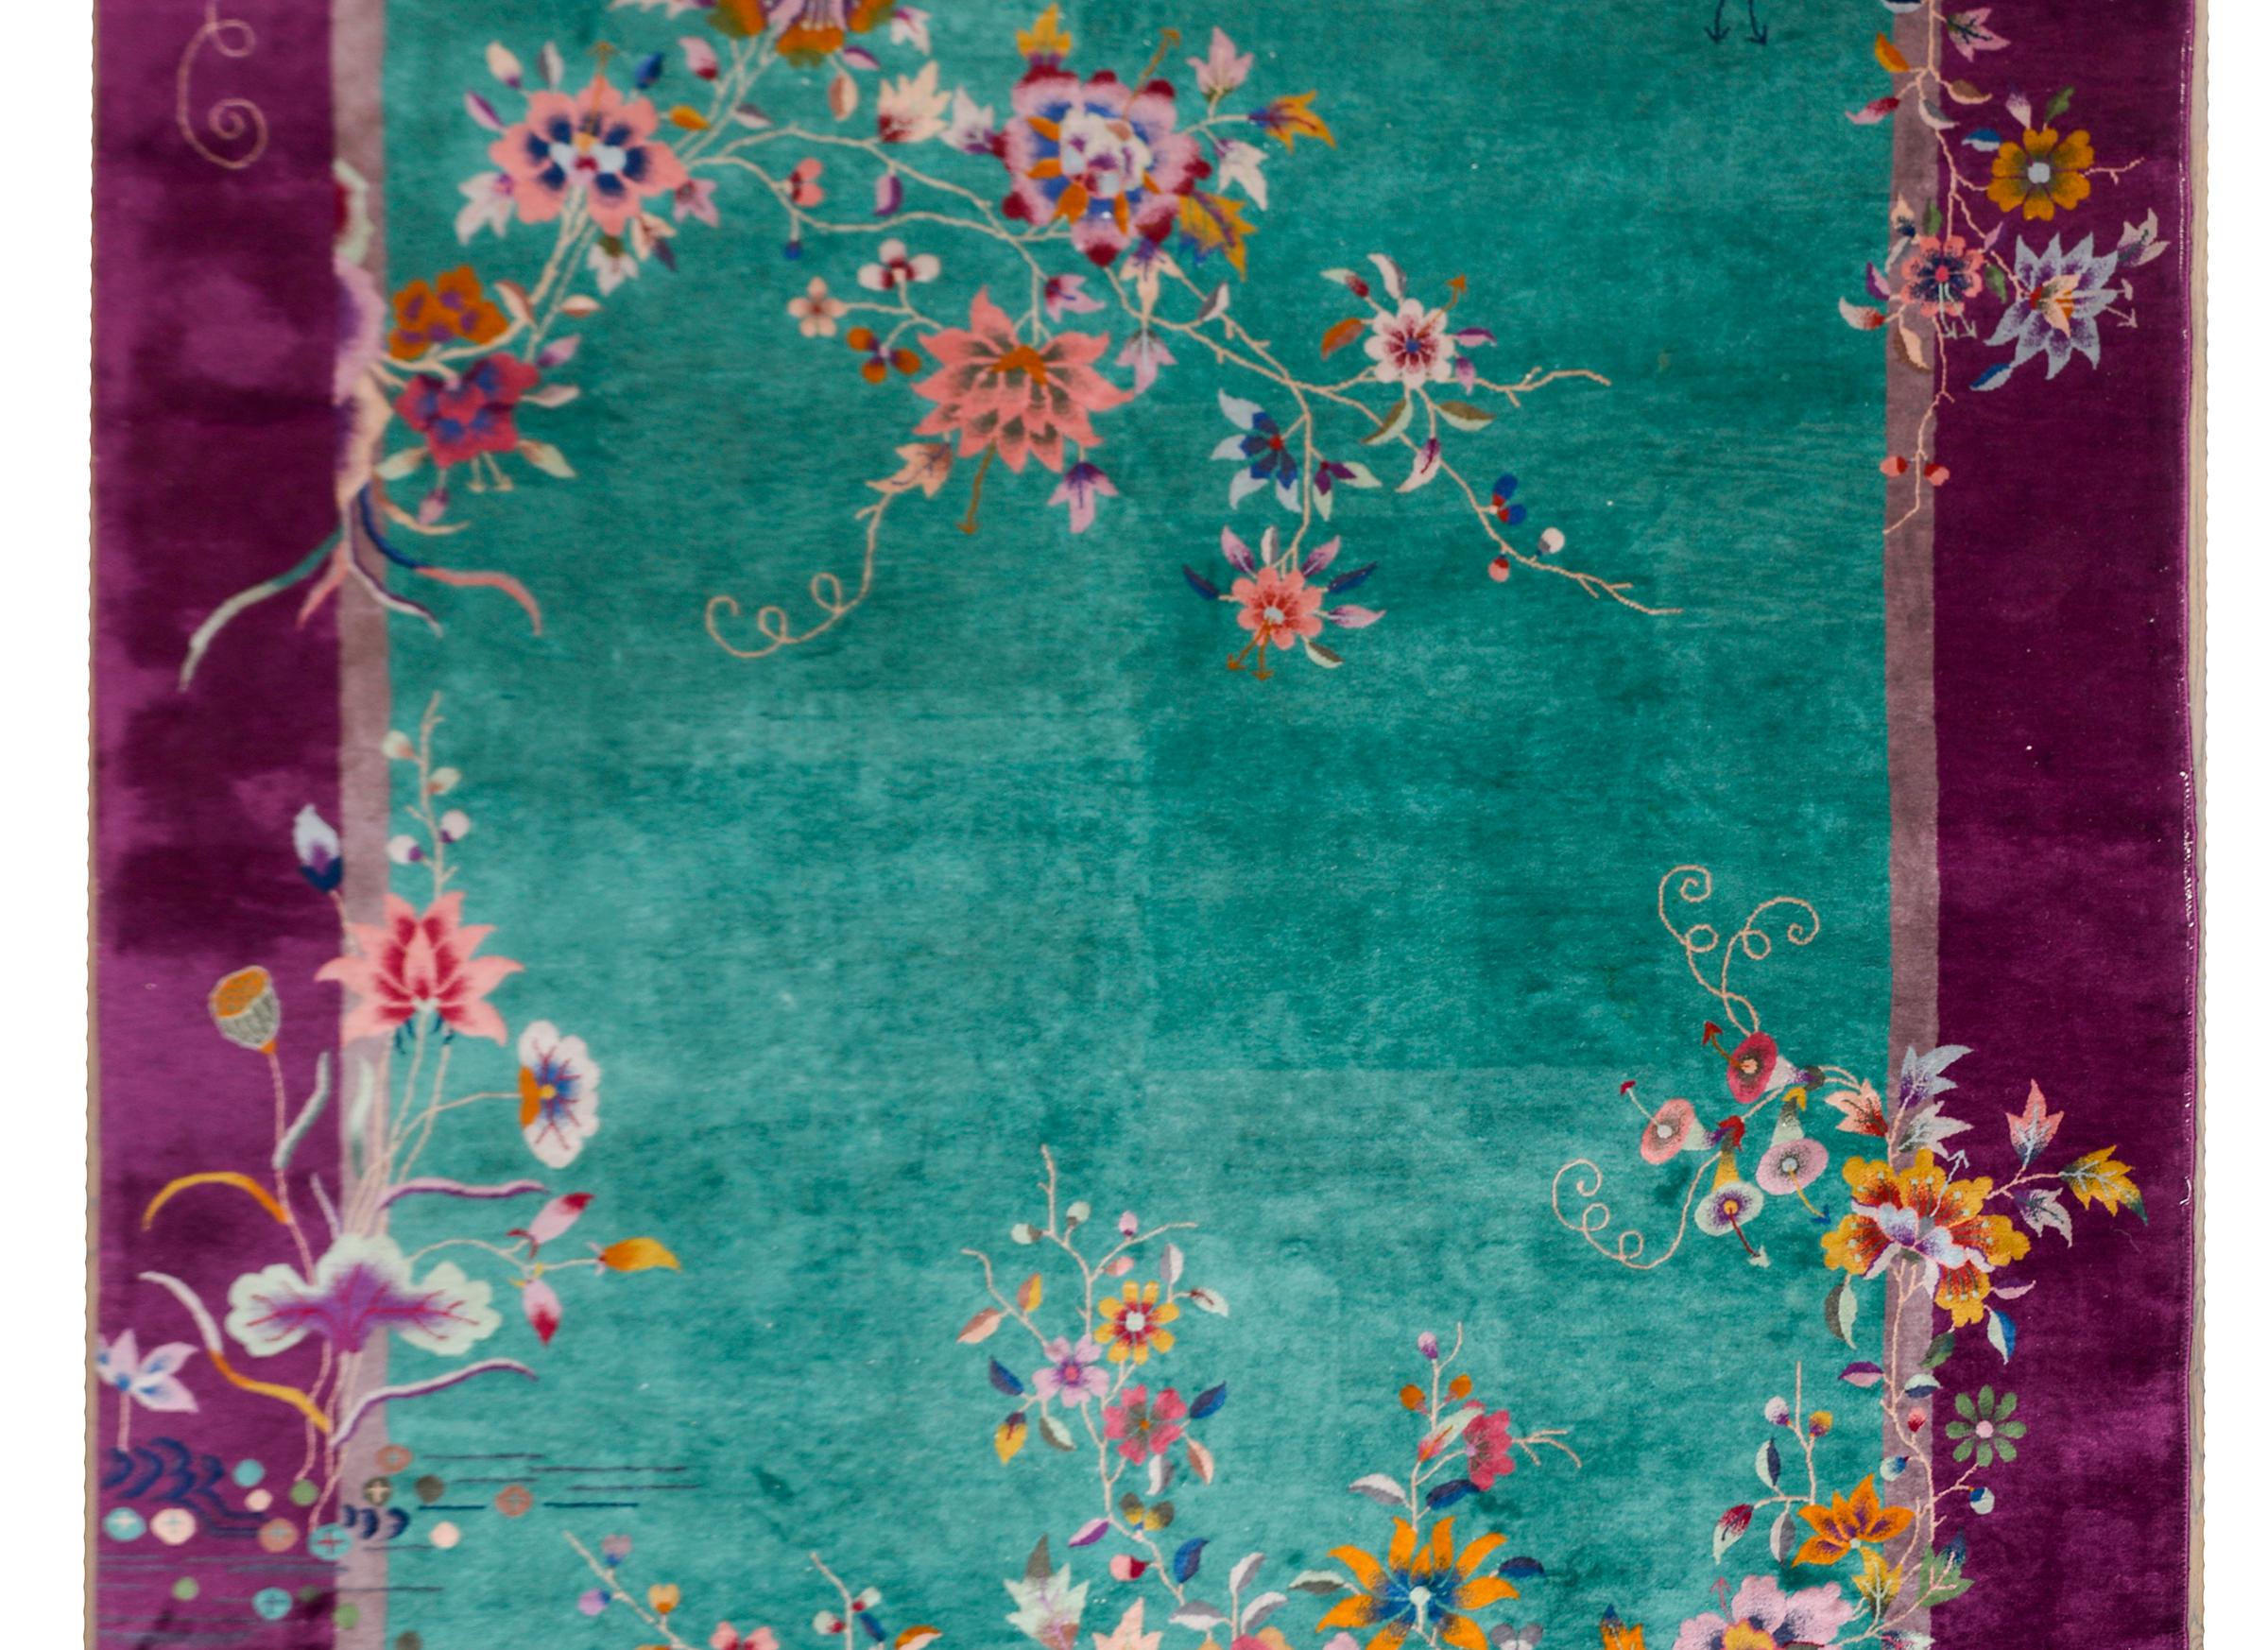 A gorgeous early 20th century Chinese Art Deco rug with a wide eggplant colored border surrounding a teal field, and bother laid with the most beautiful large-scale multi-colored peonies, lotus, and chrysanthemums.